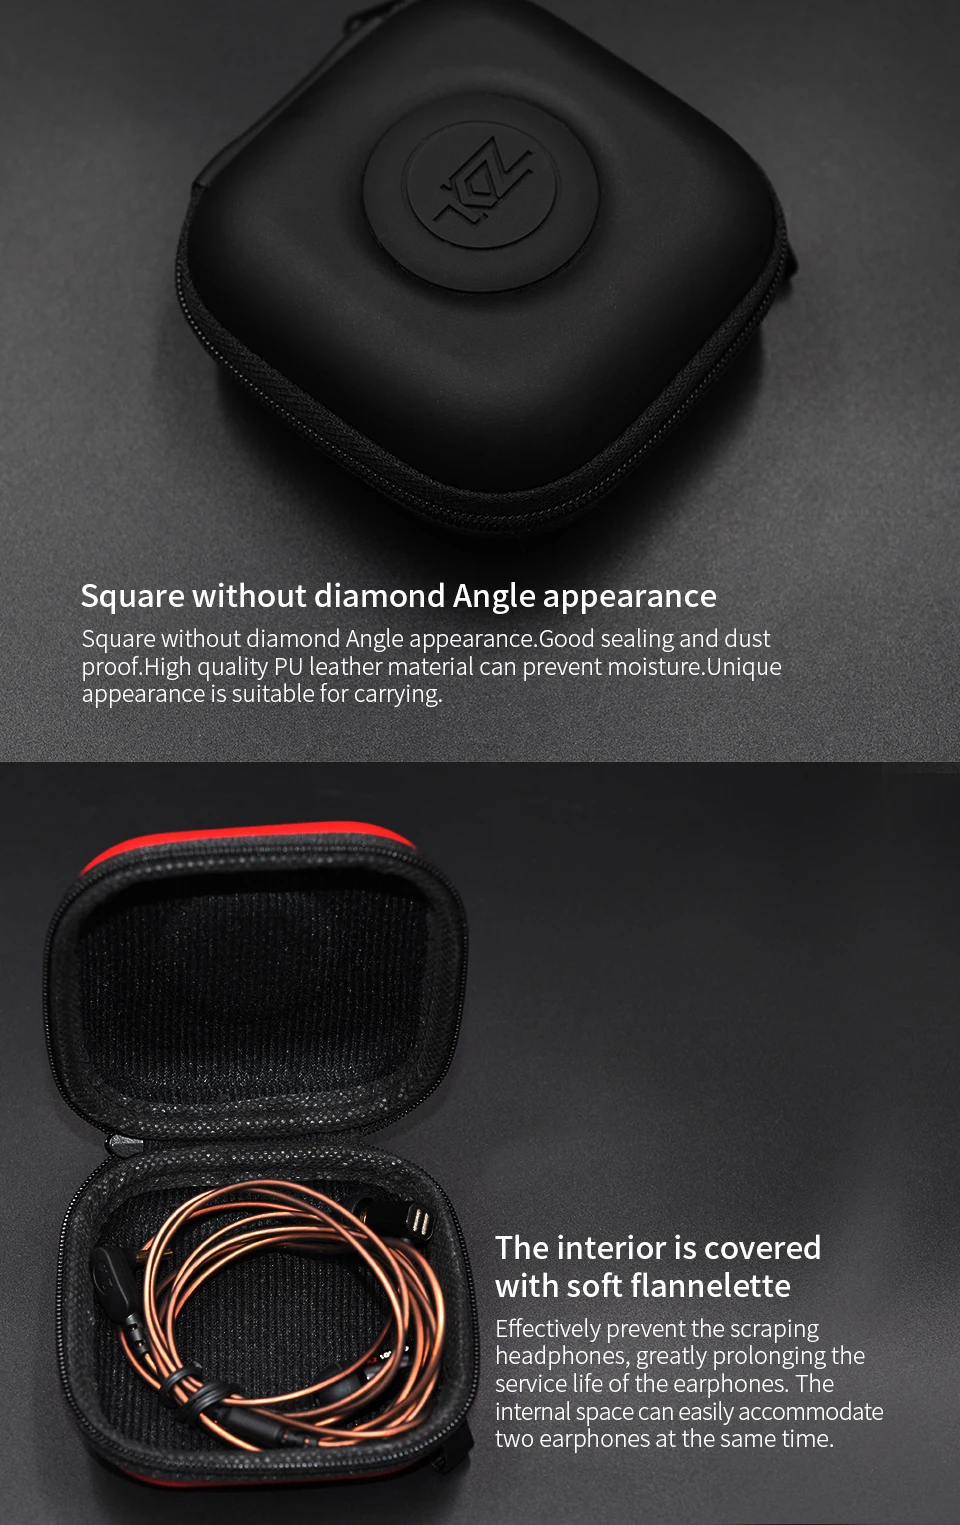 KZ_PU_Earphones_Bag_High_Quality_Logo_Package_In_Headset_Headphones_Case_Protect_Earbuds_Data_Charging_Cable_Storage_Boxes (5)